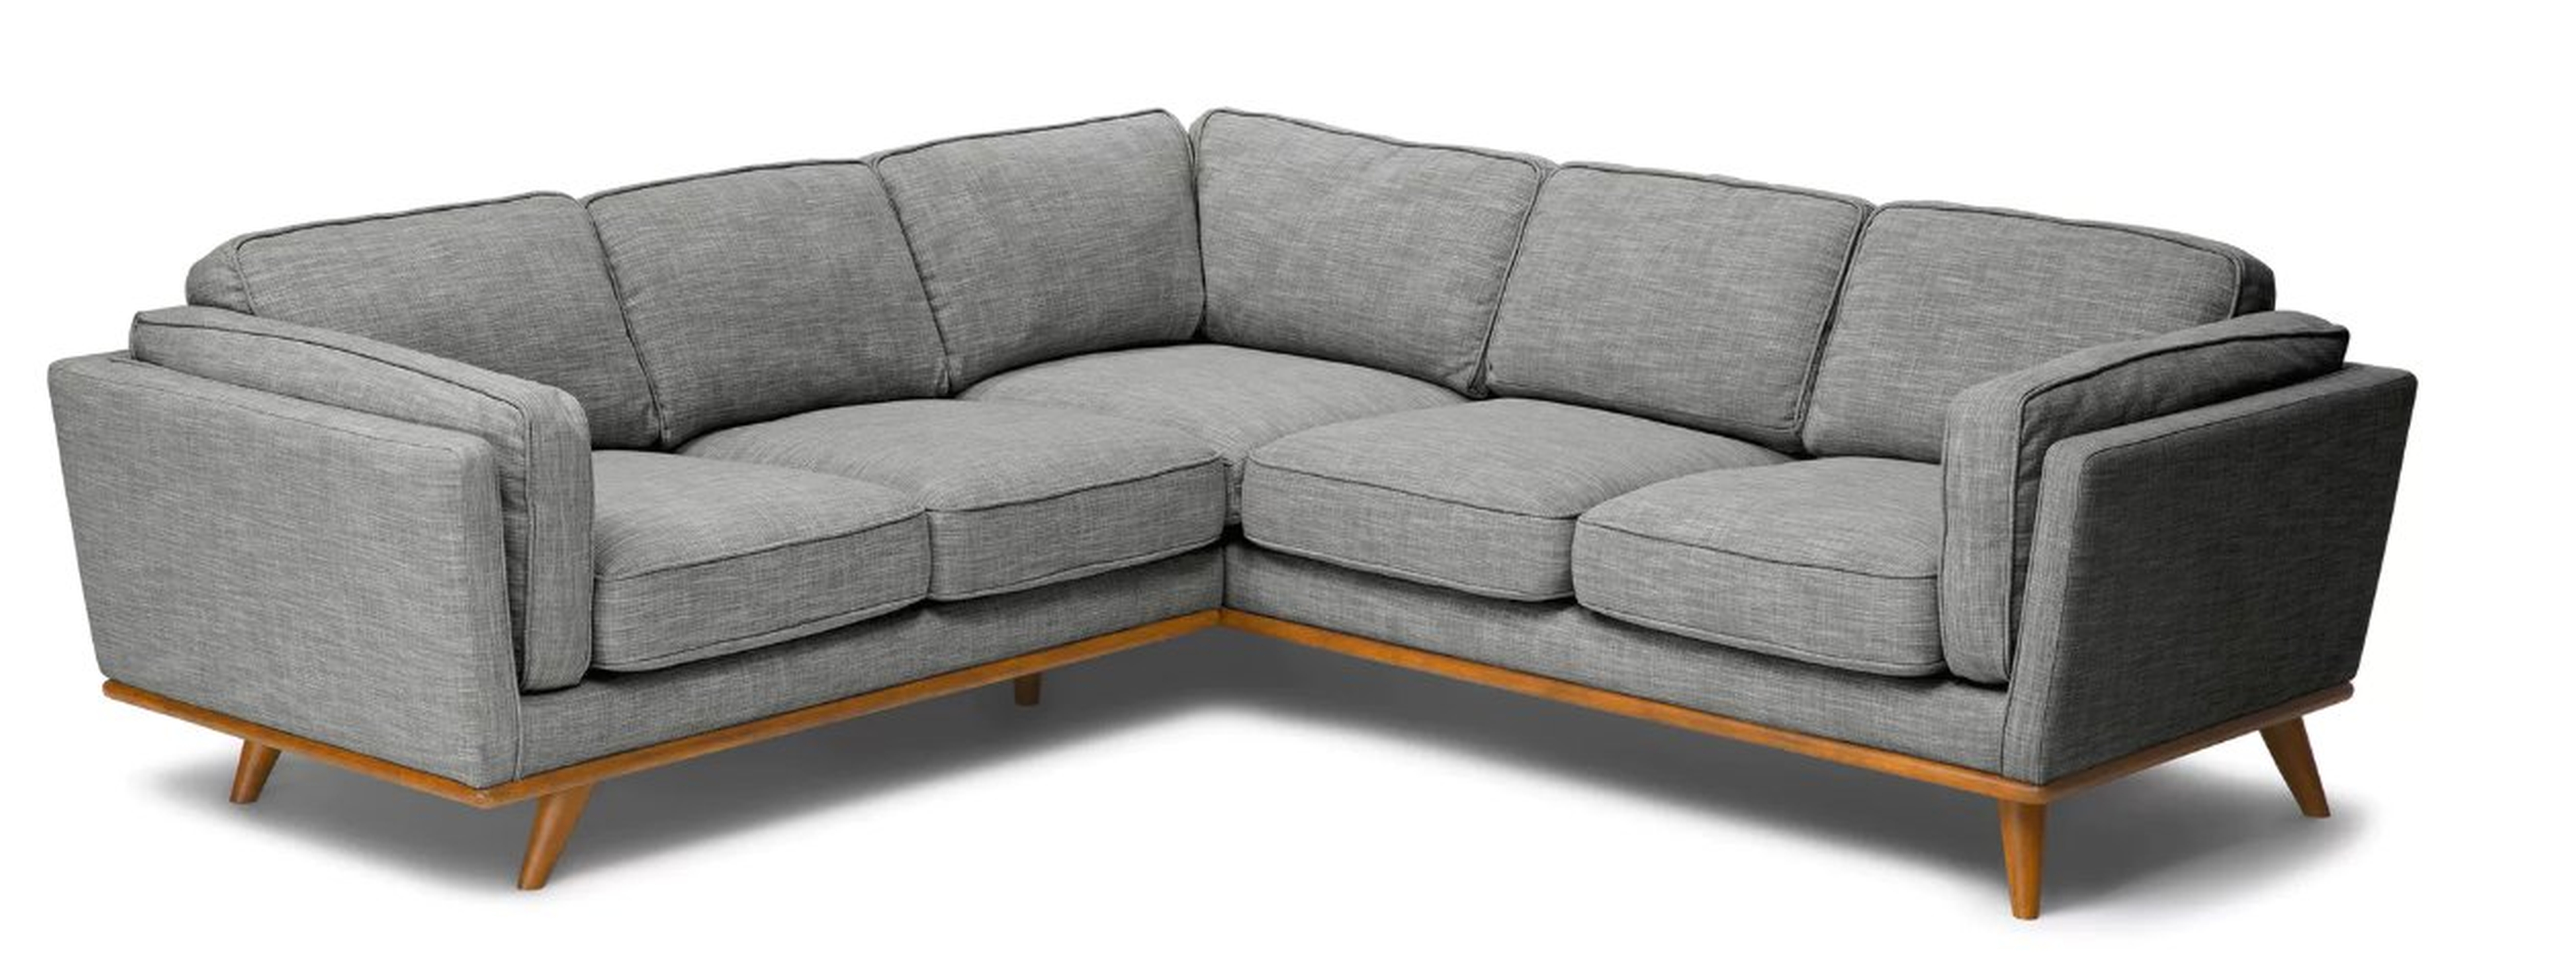 Timber Corner Sectional, Pebble Gray, 5+ Seater - Article